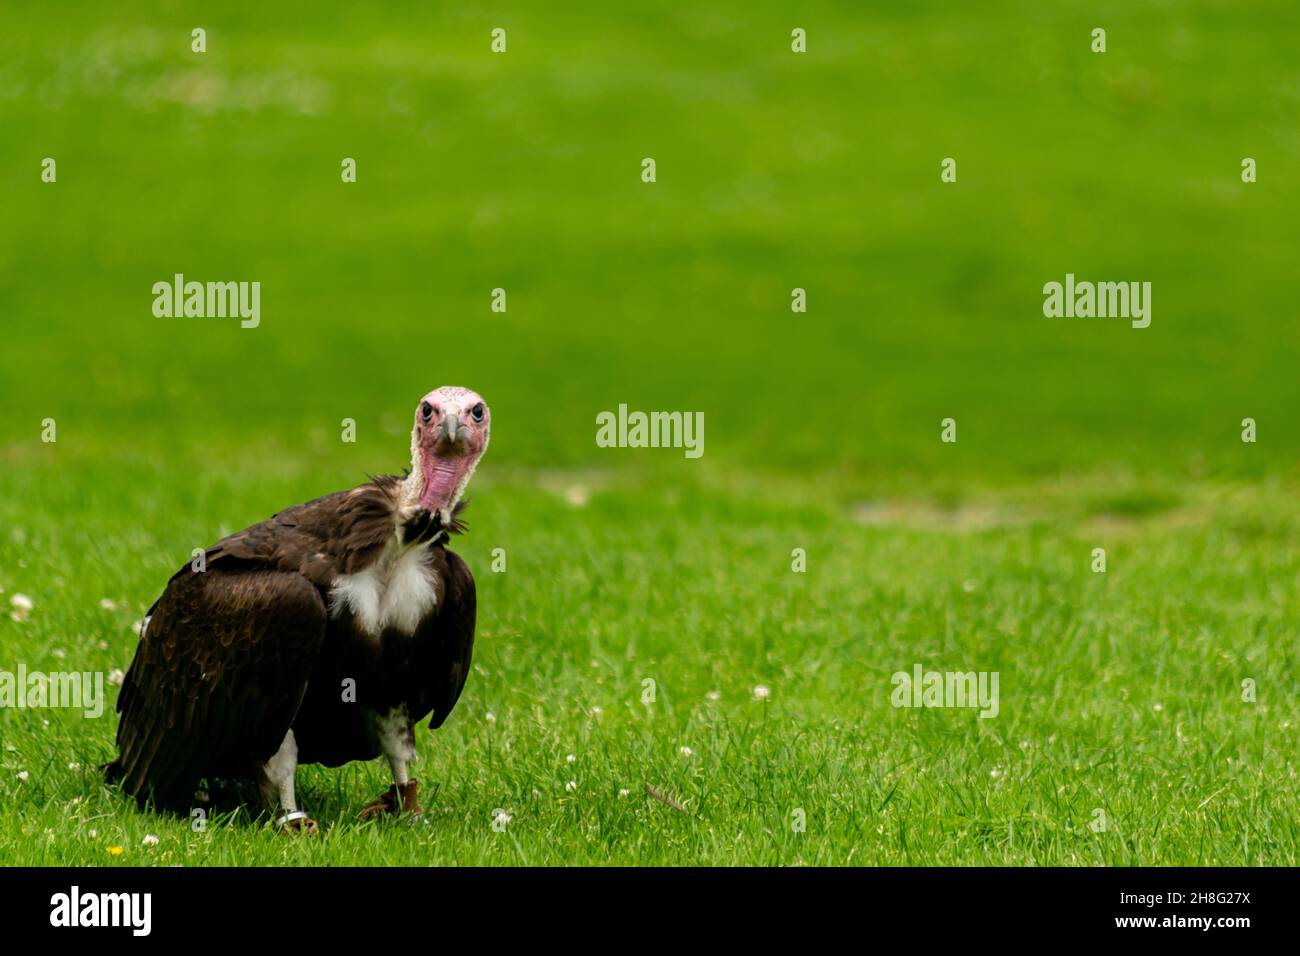 Hooded vulture bird sitting on a grass looking straight to camera, face view of a bird of prey walking on the ground, vulture held captive and trained Stock Photo